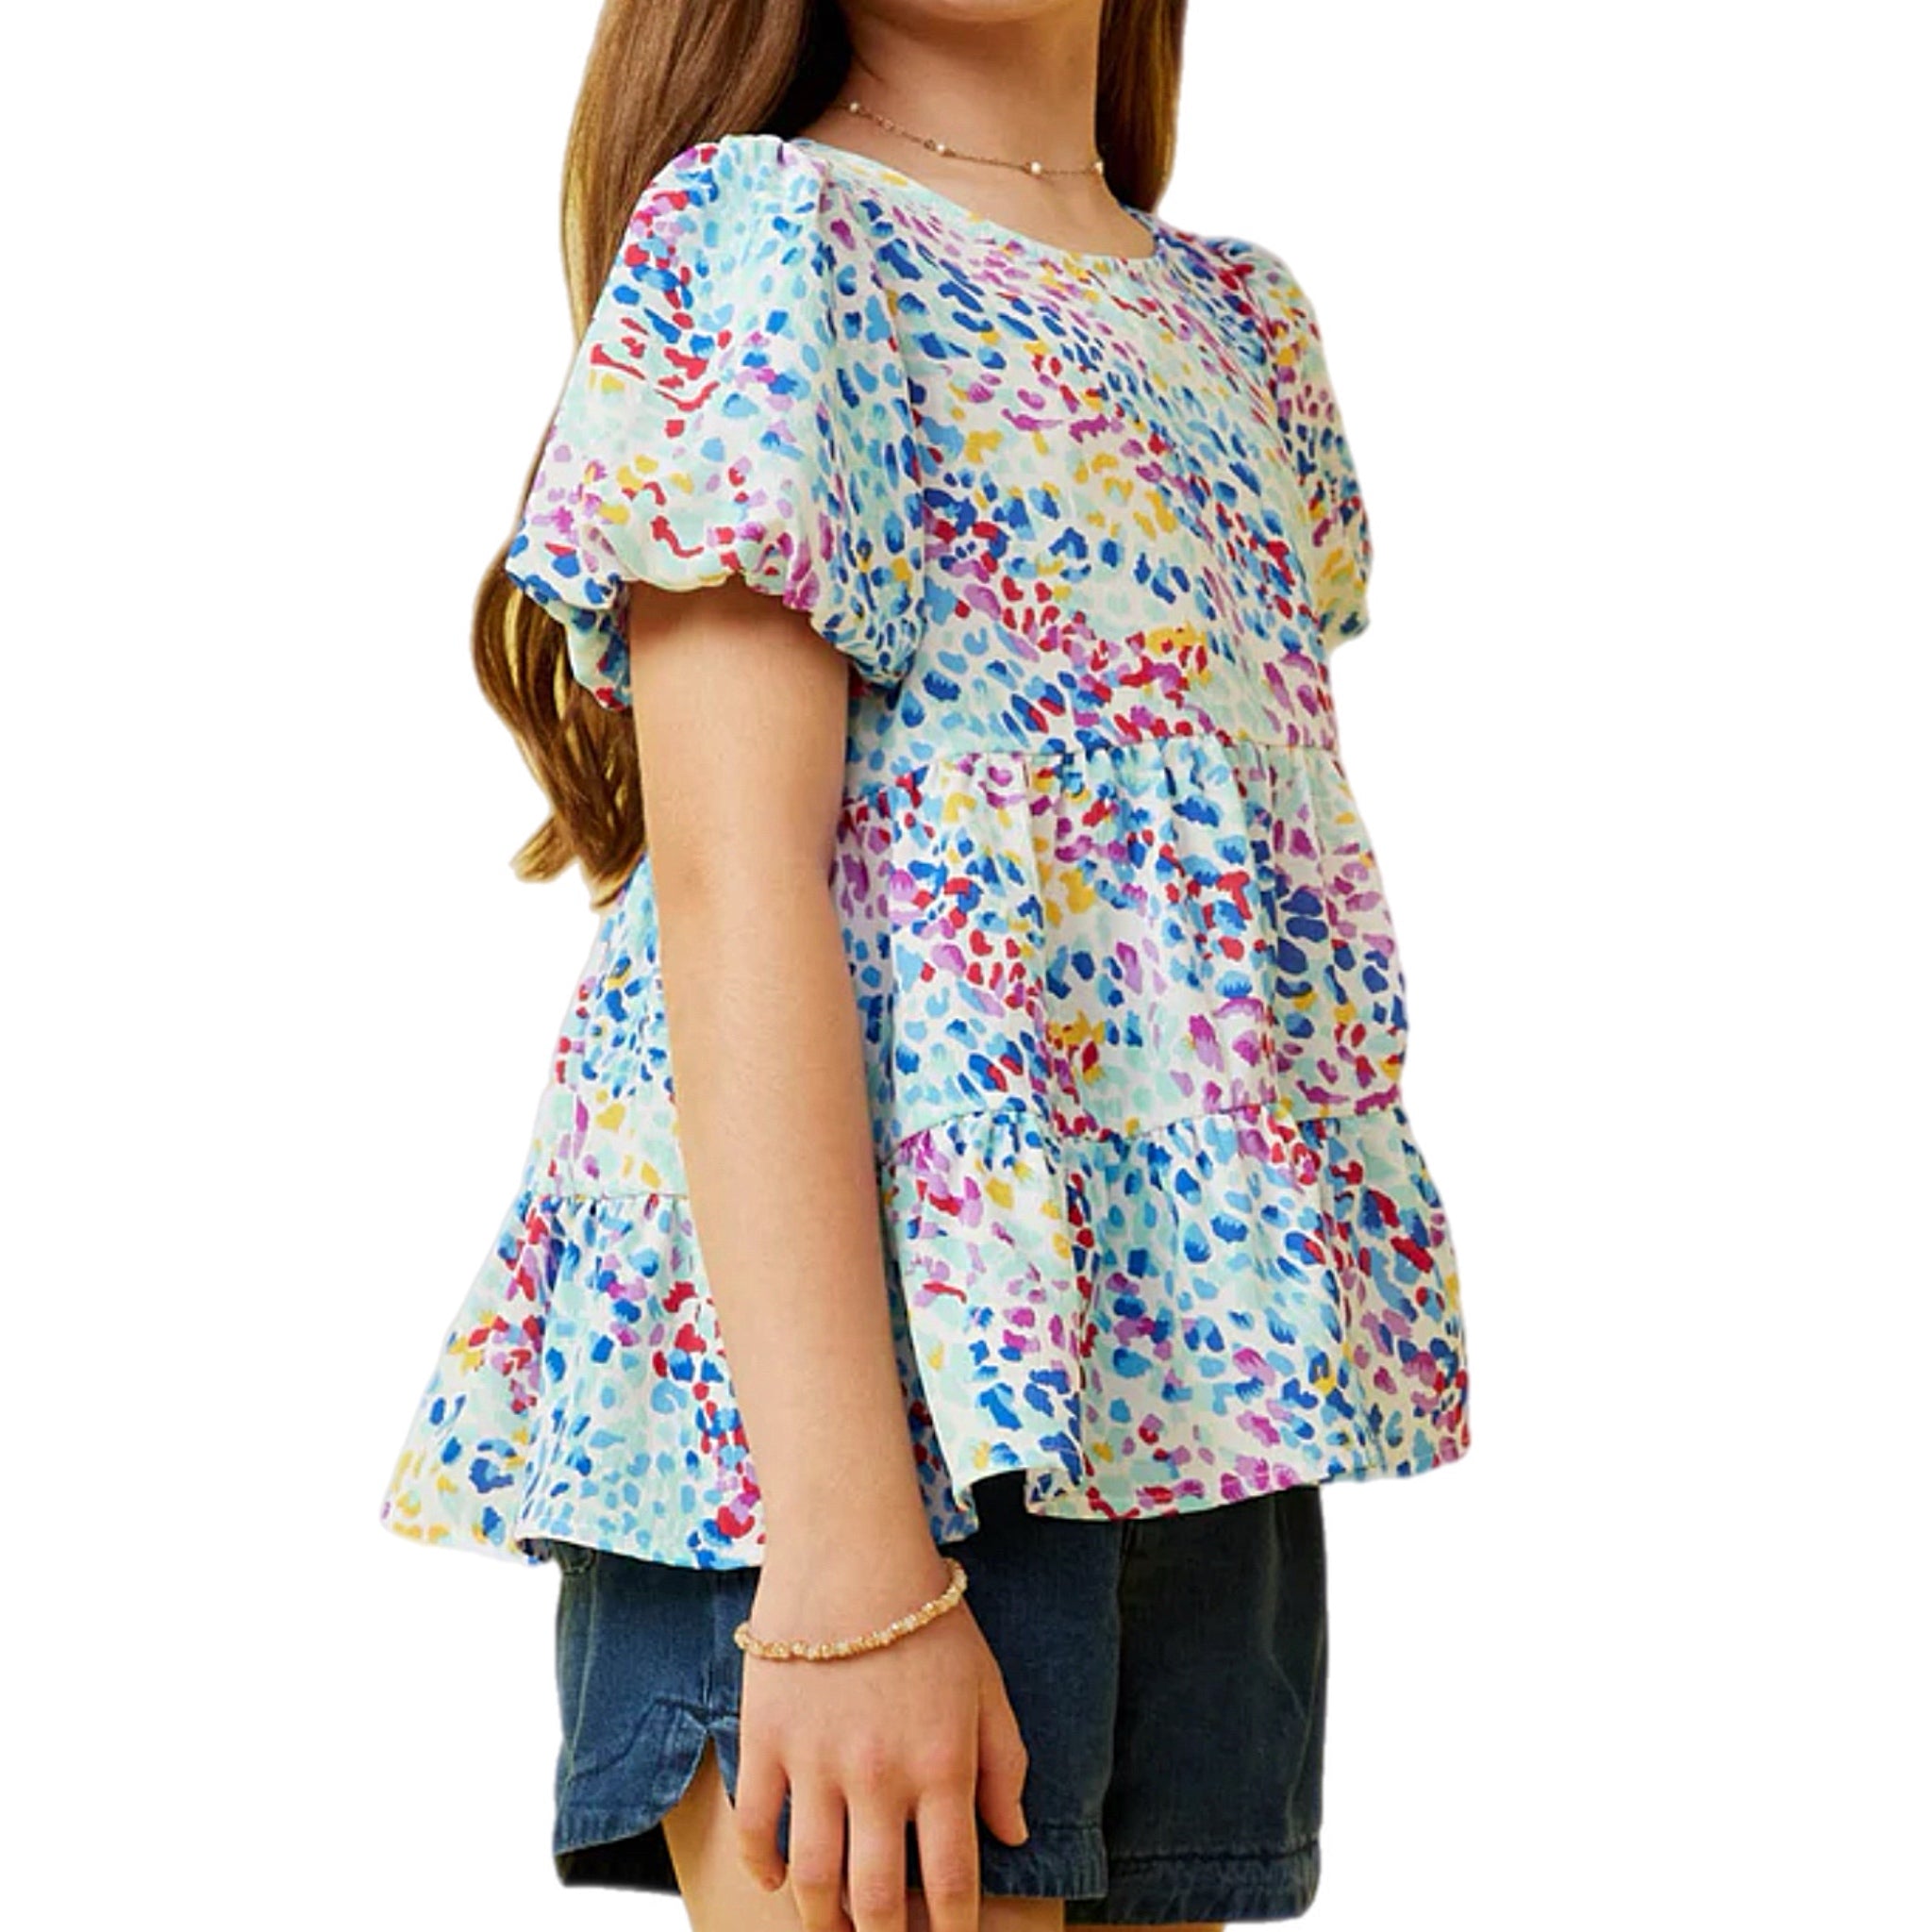 ABSTRACT MULTI COLOR DOT TOP - BLUE MIX